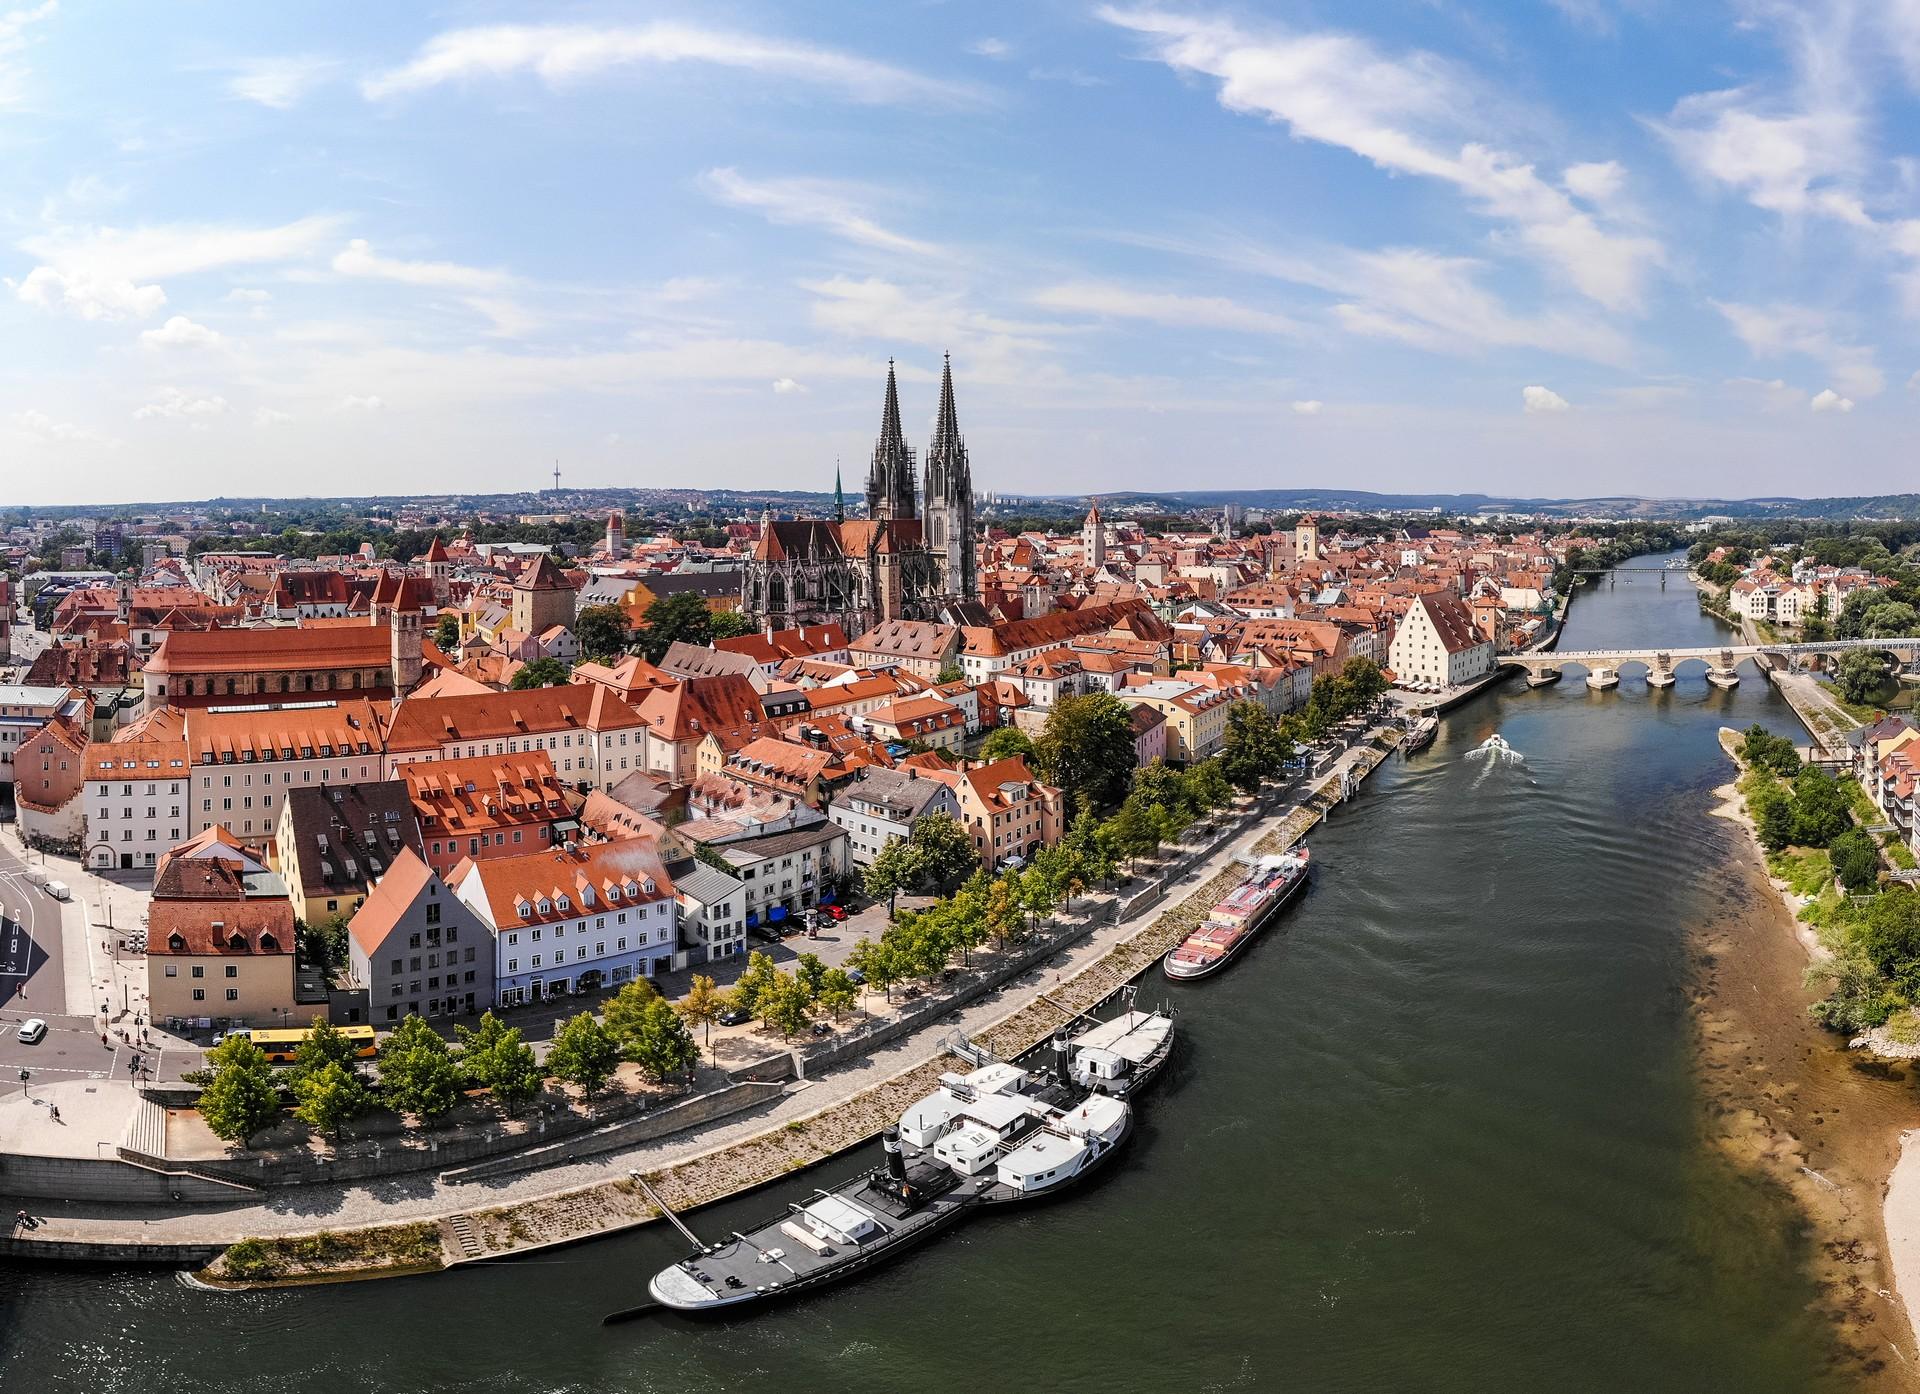 Aerial view of architecture in Regensburg on a sunny day with some clouds